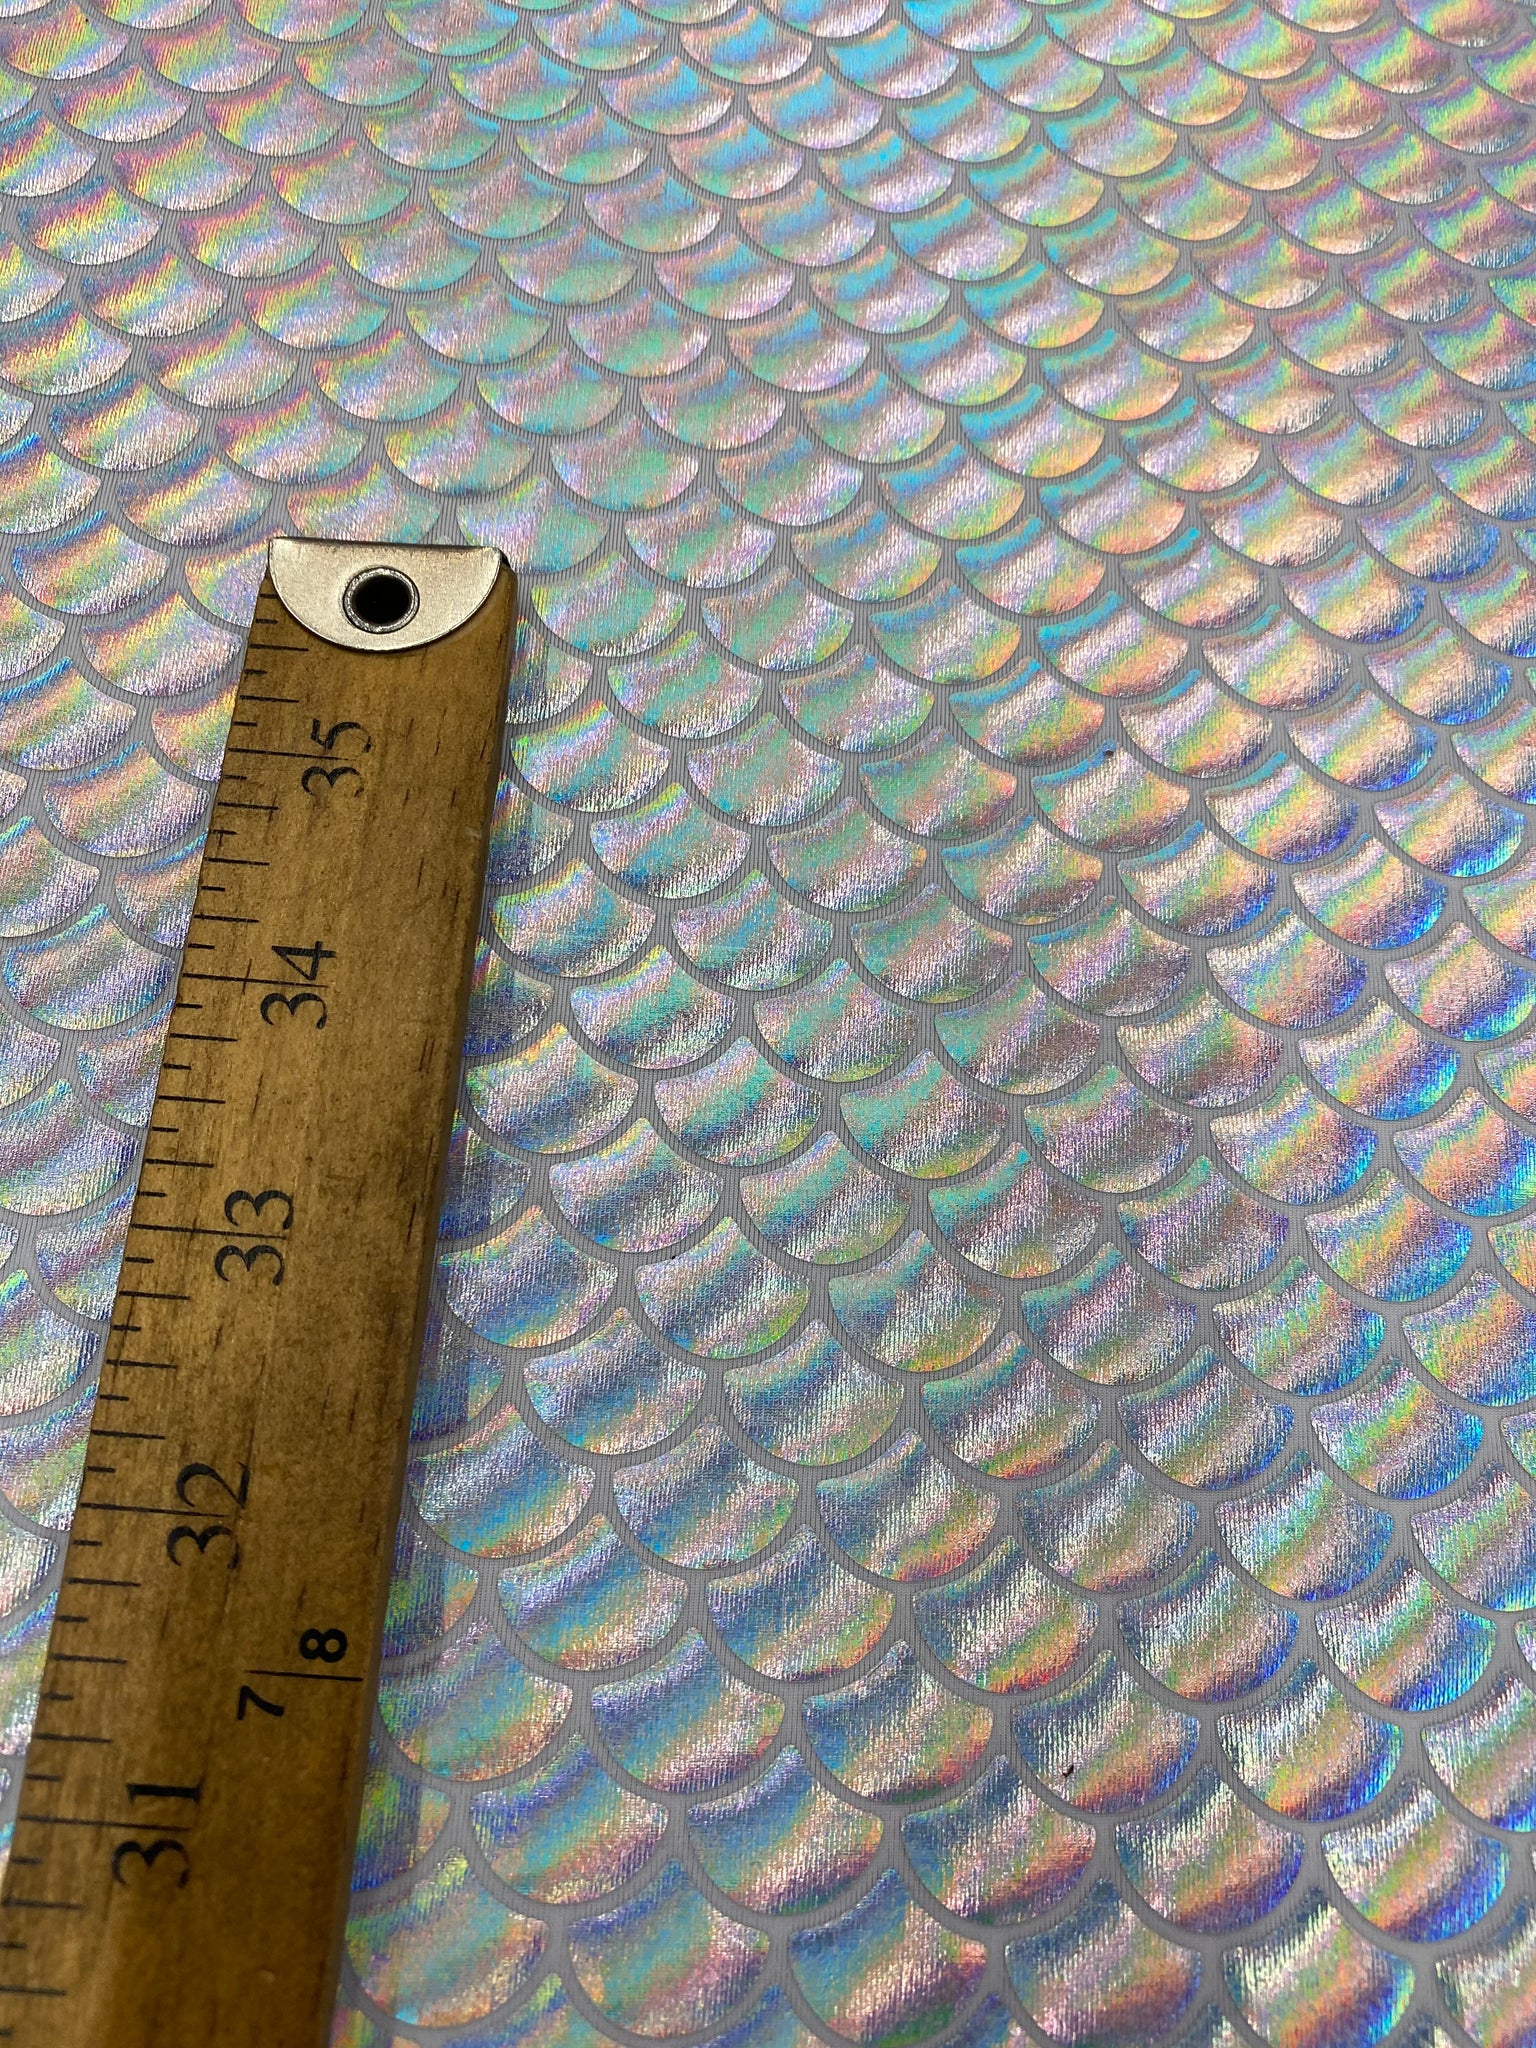 812 Mermaid Scale Pattern Fabric Fish Scales Spandex Fabric